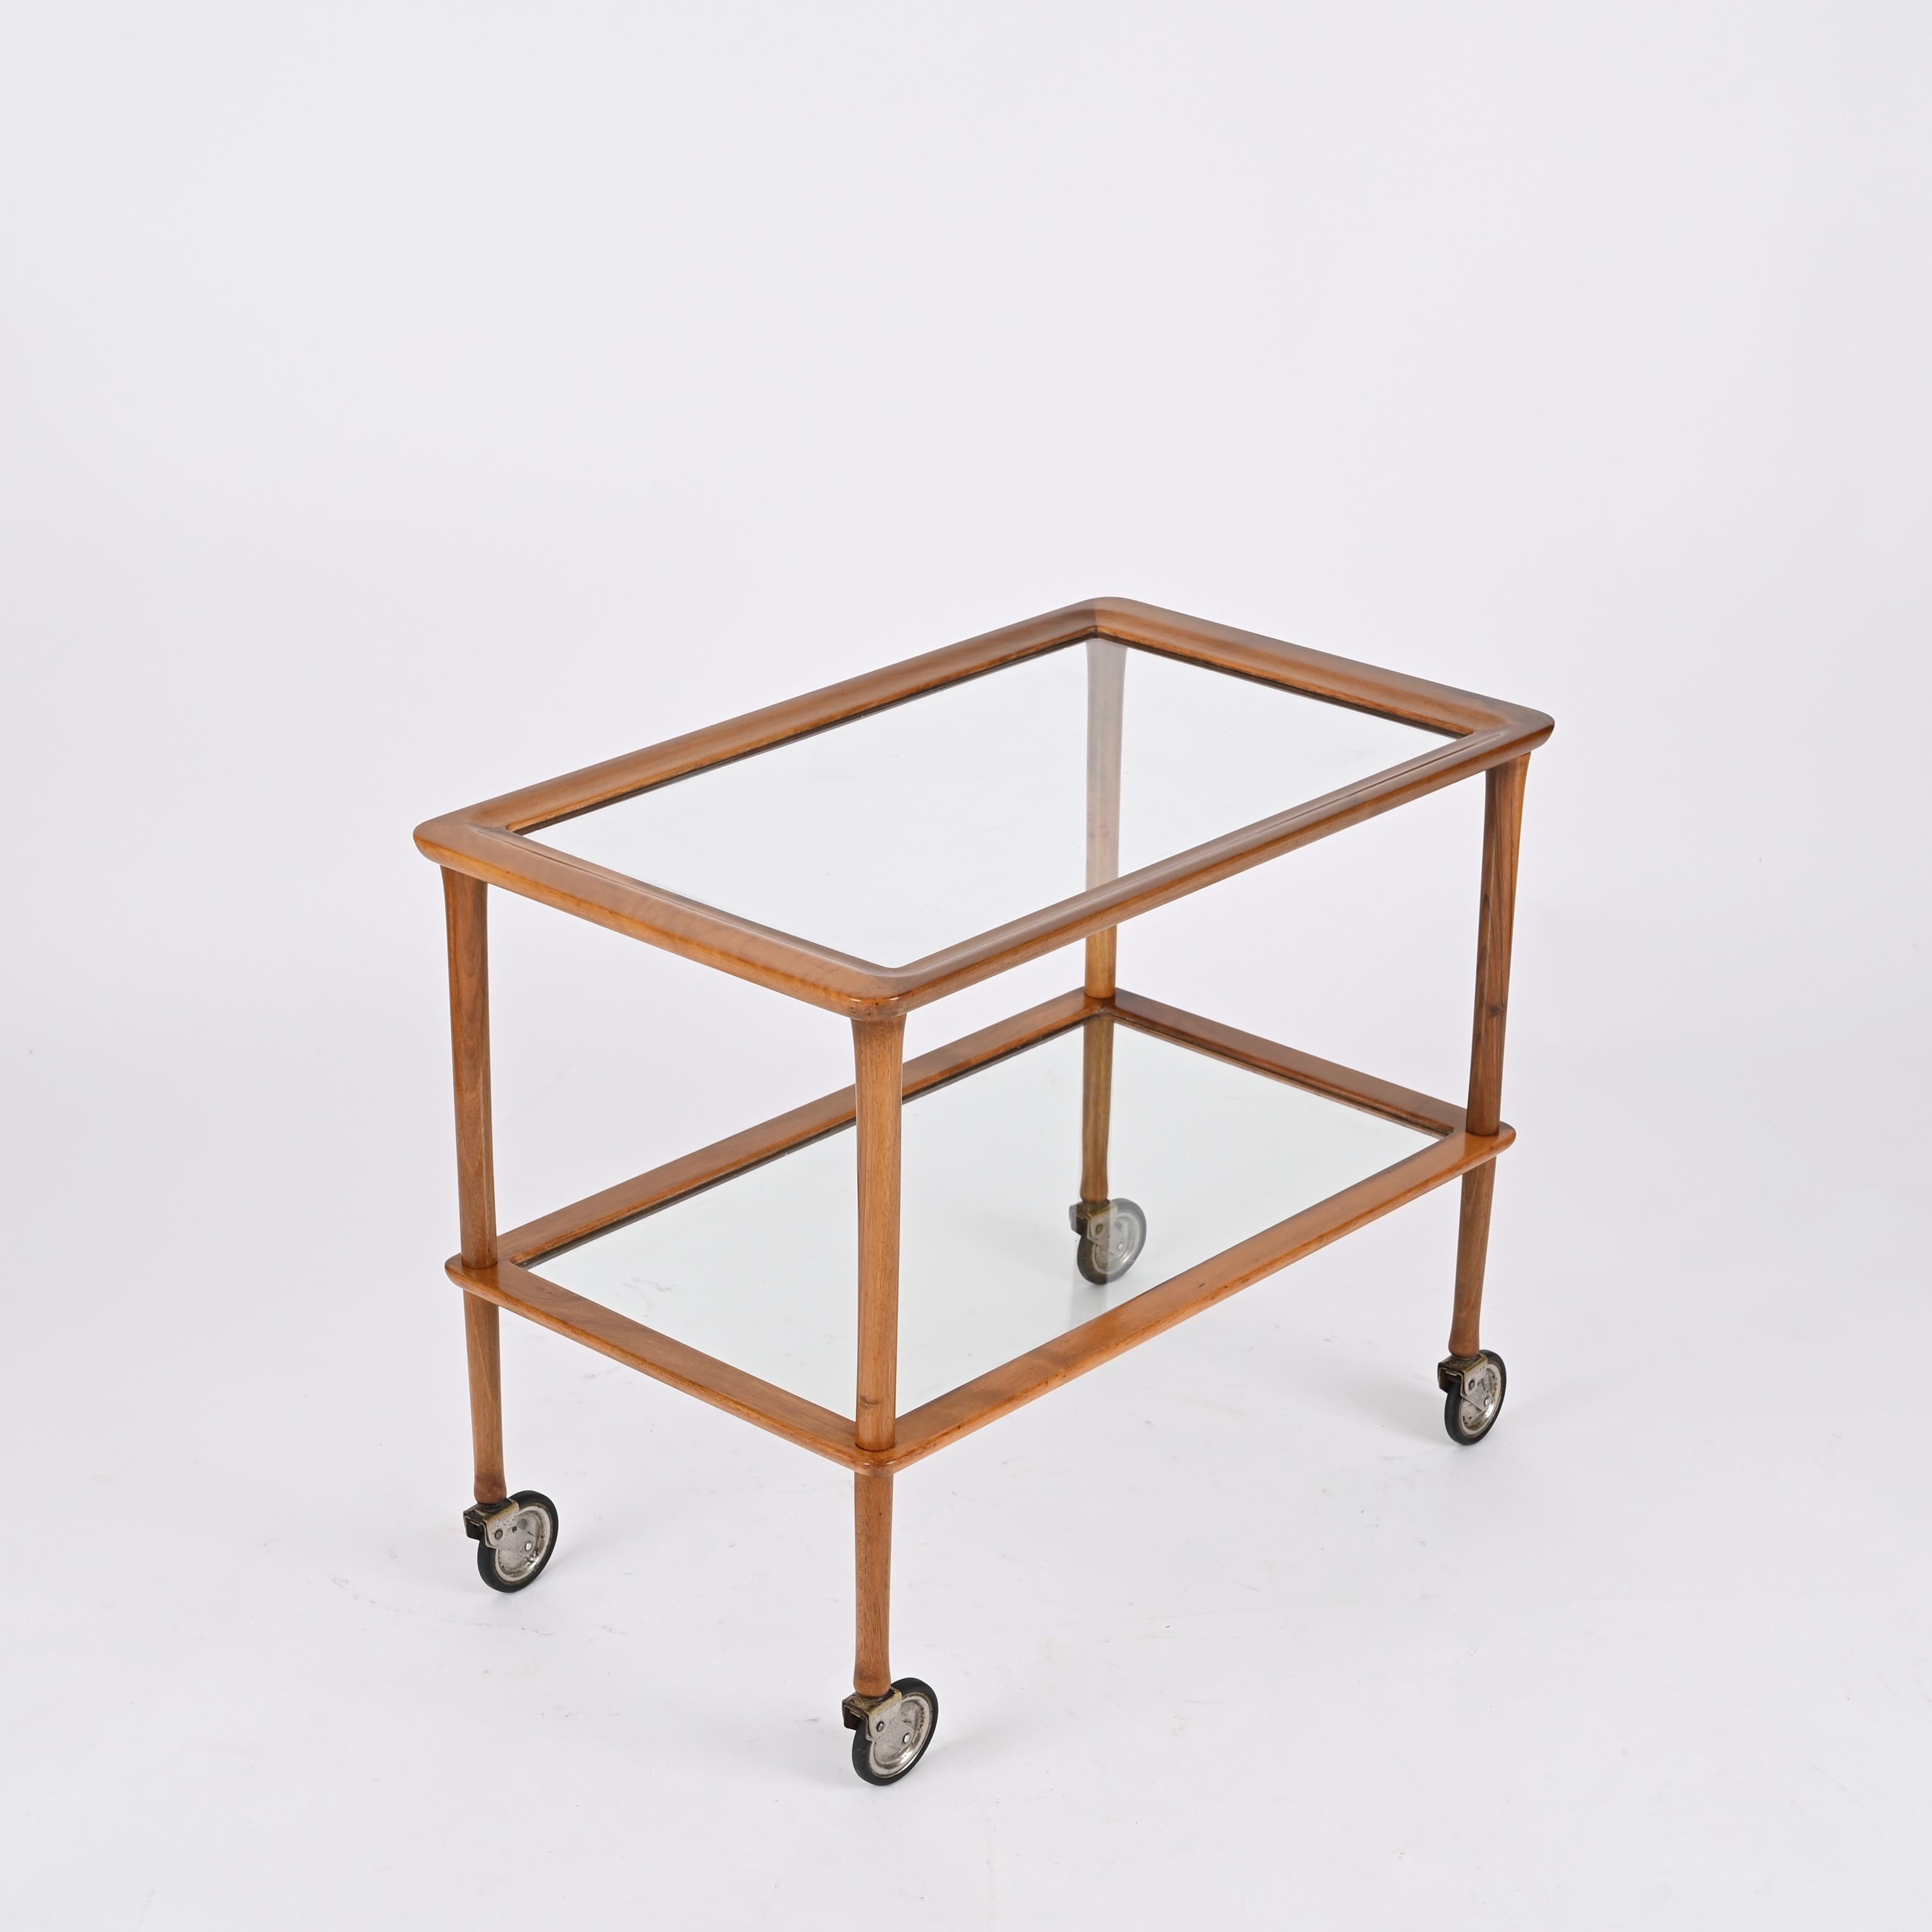 20th Century Midcentury Italian Bar Cart in Walnut and Glass, Cesare Lacca, Italy, 1960s For Sale